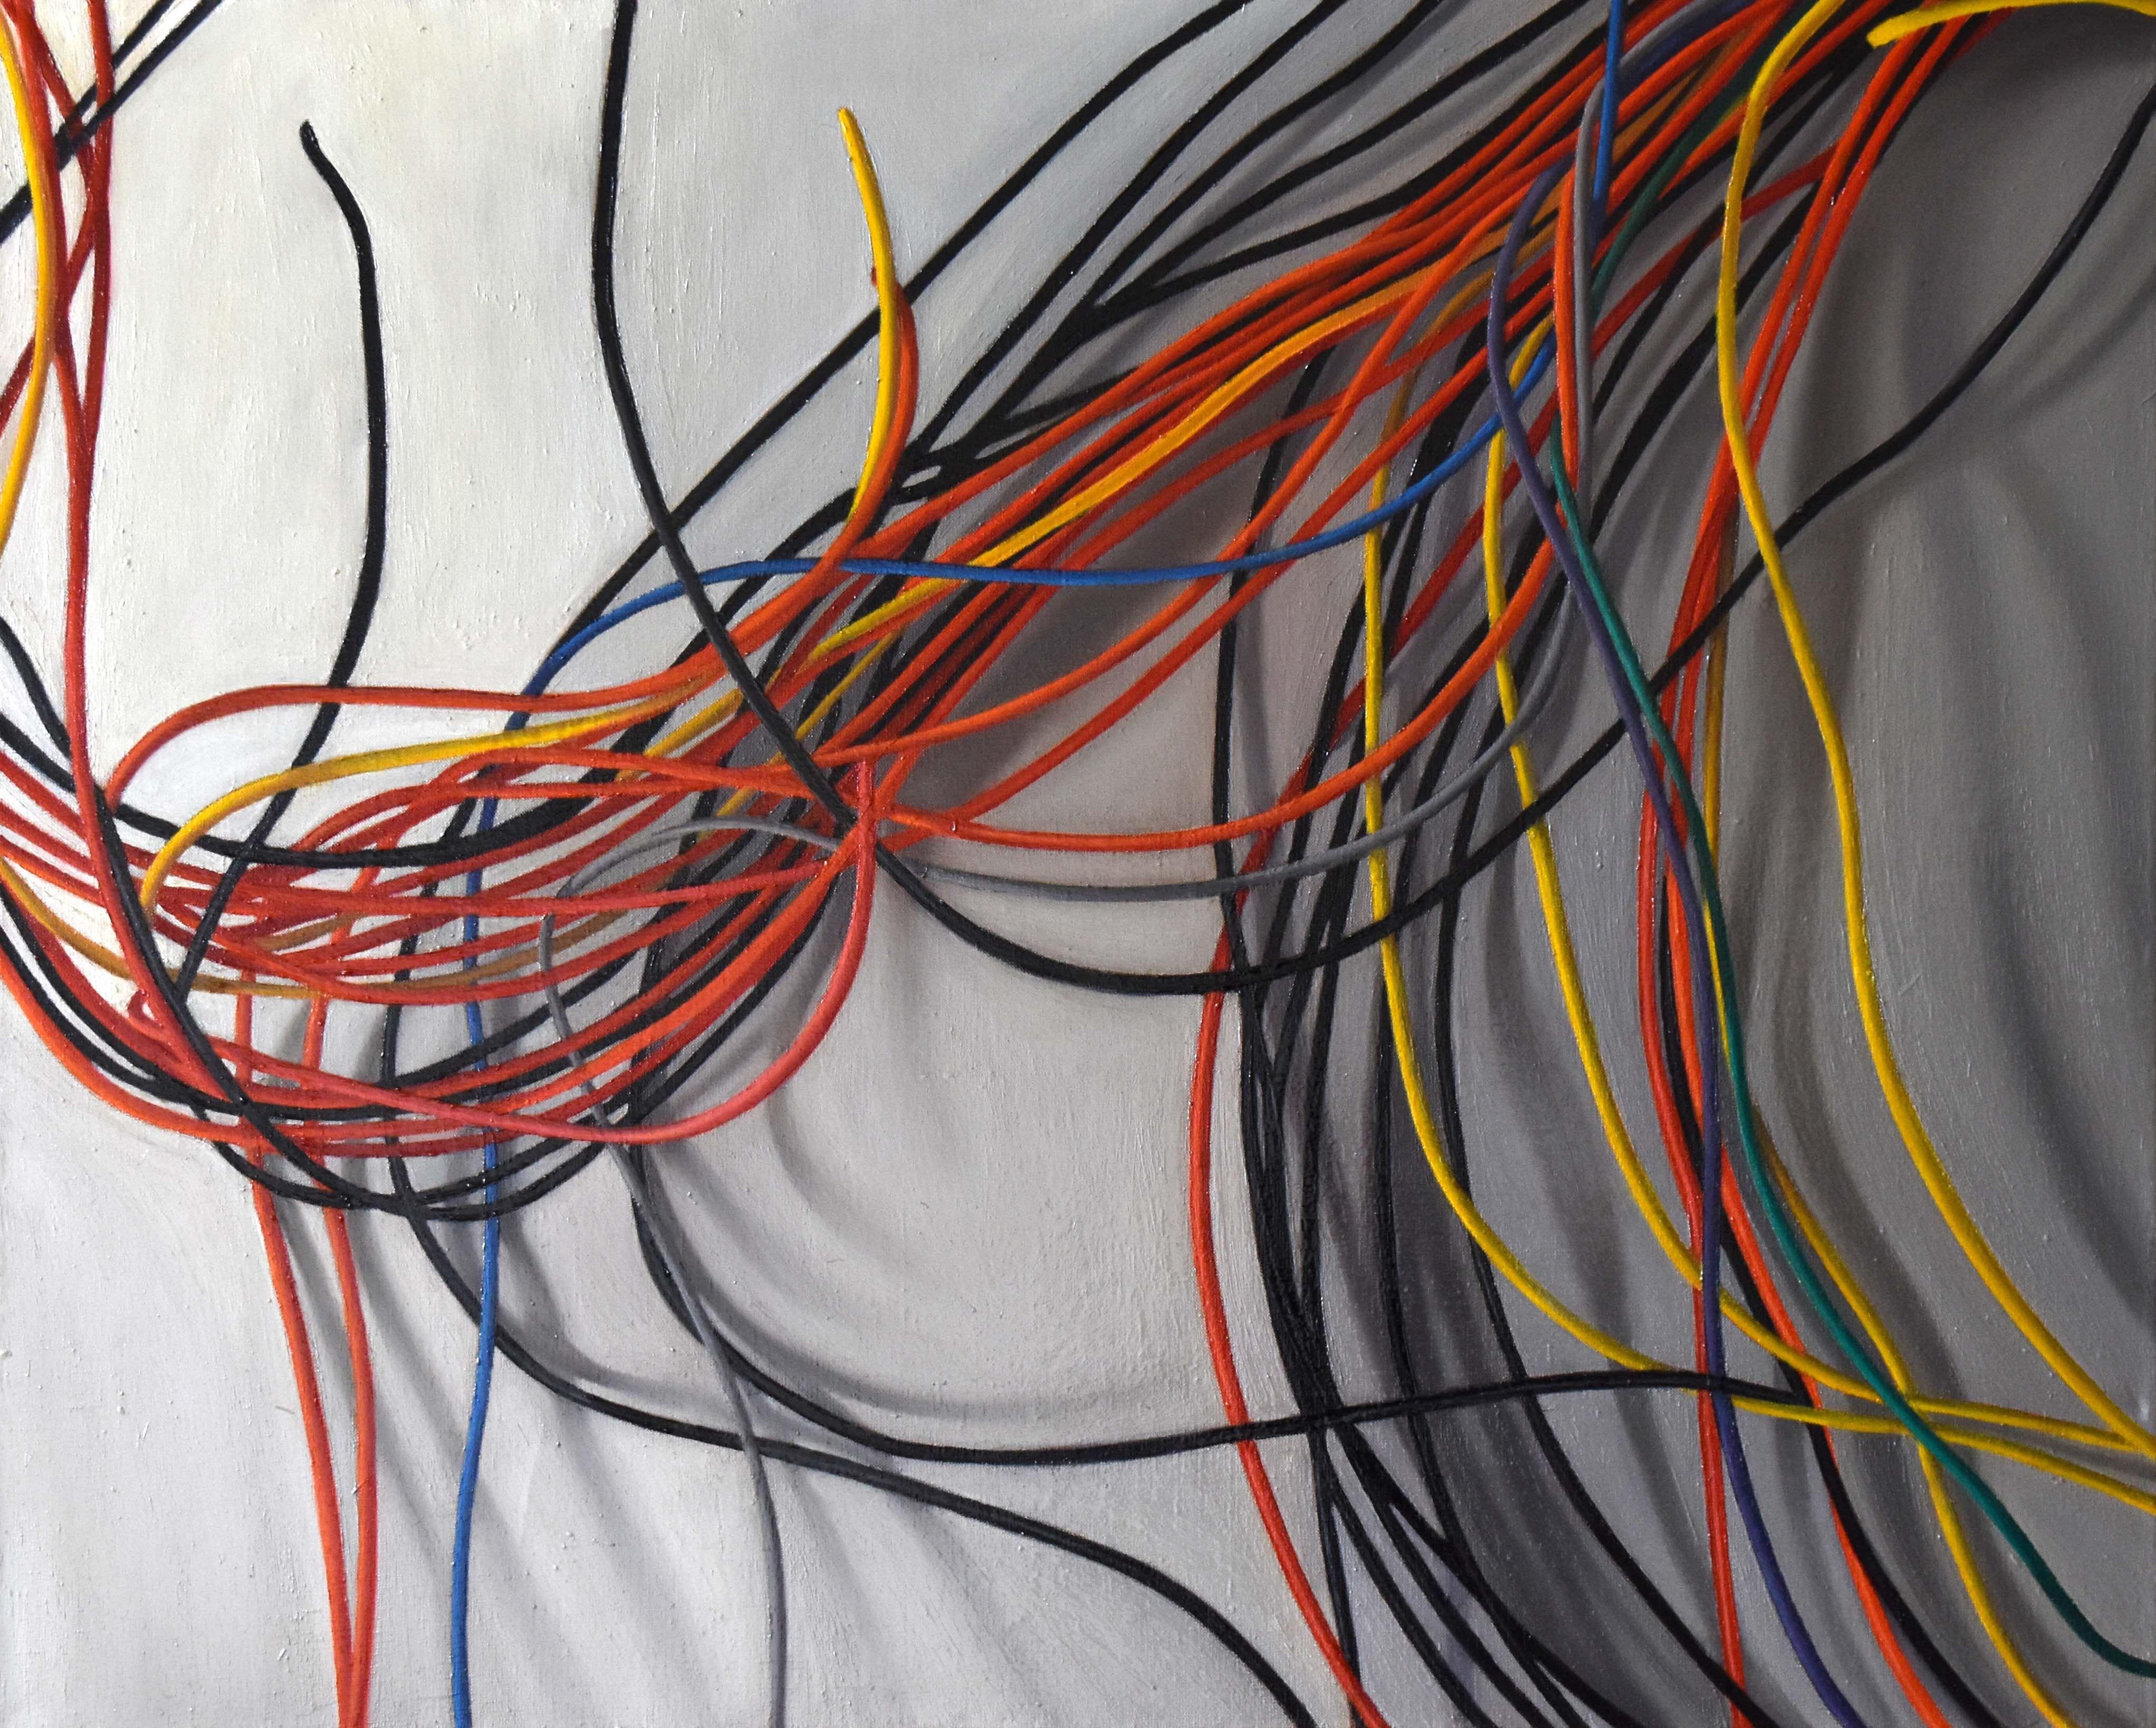 Cables, Painting, Oil on Canvas